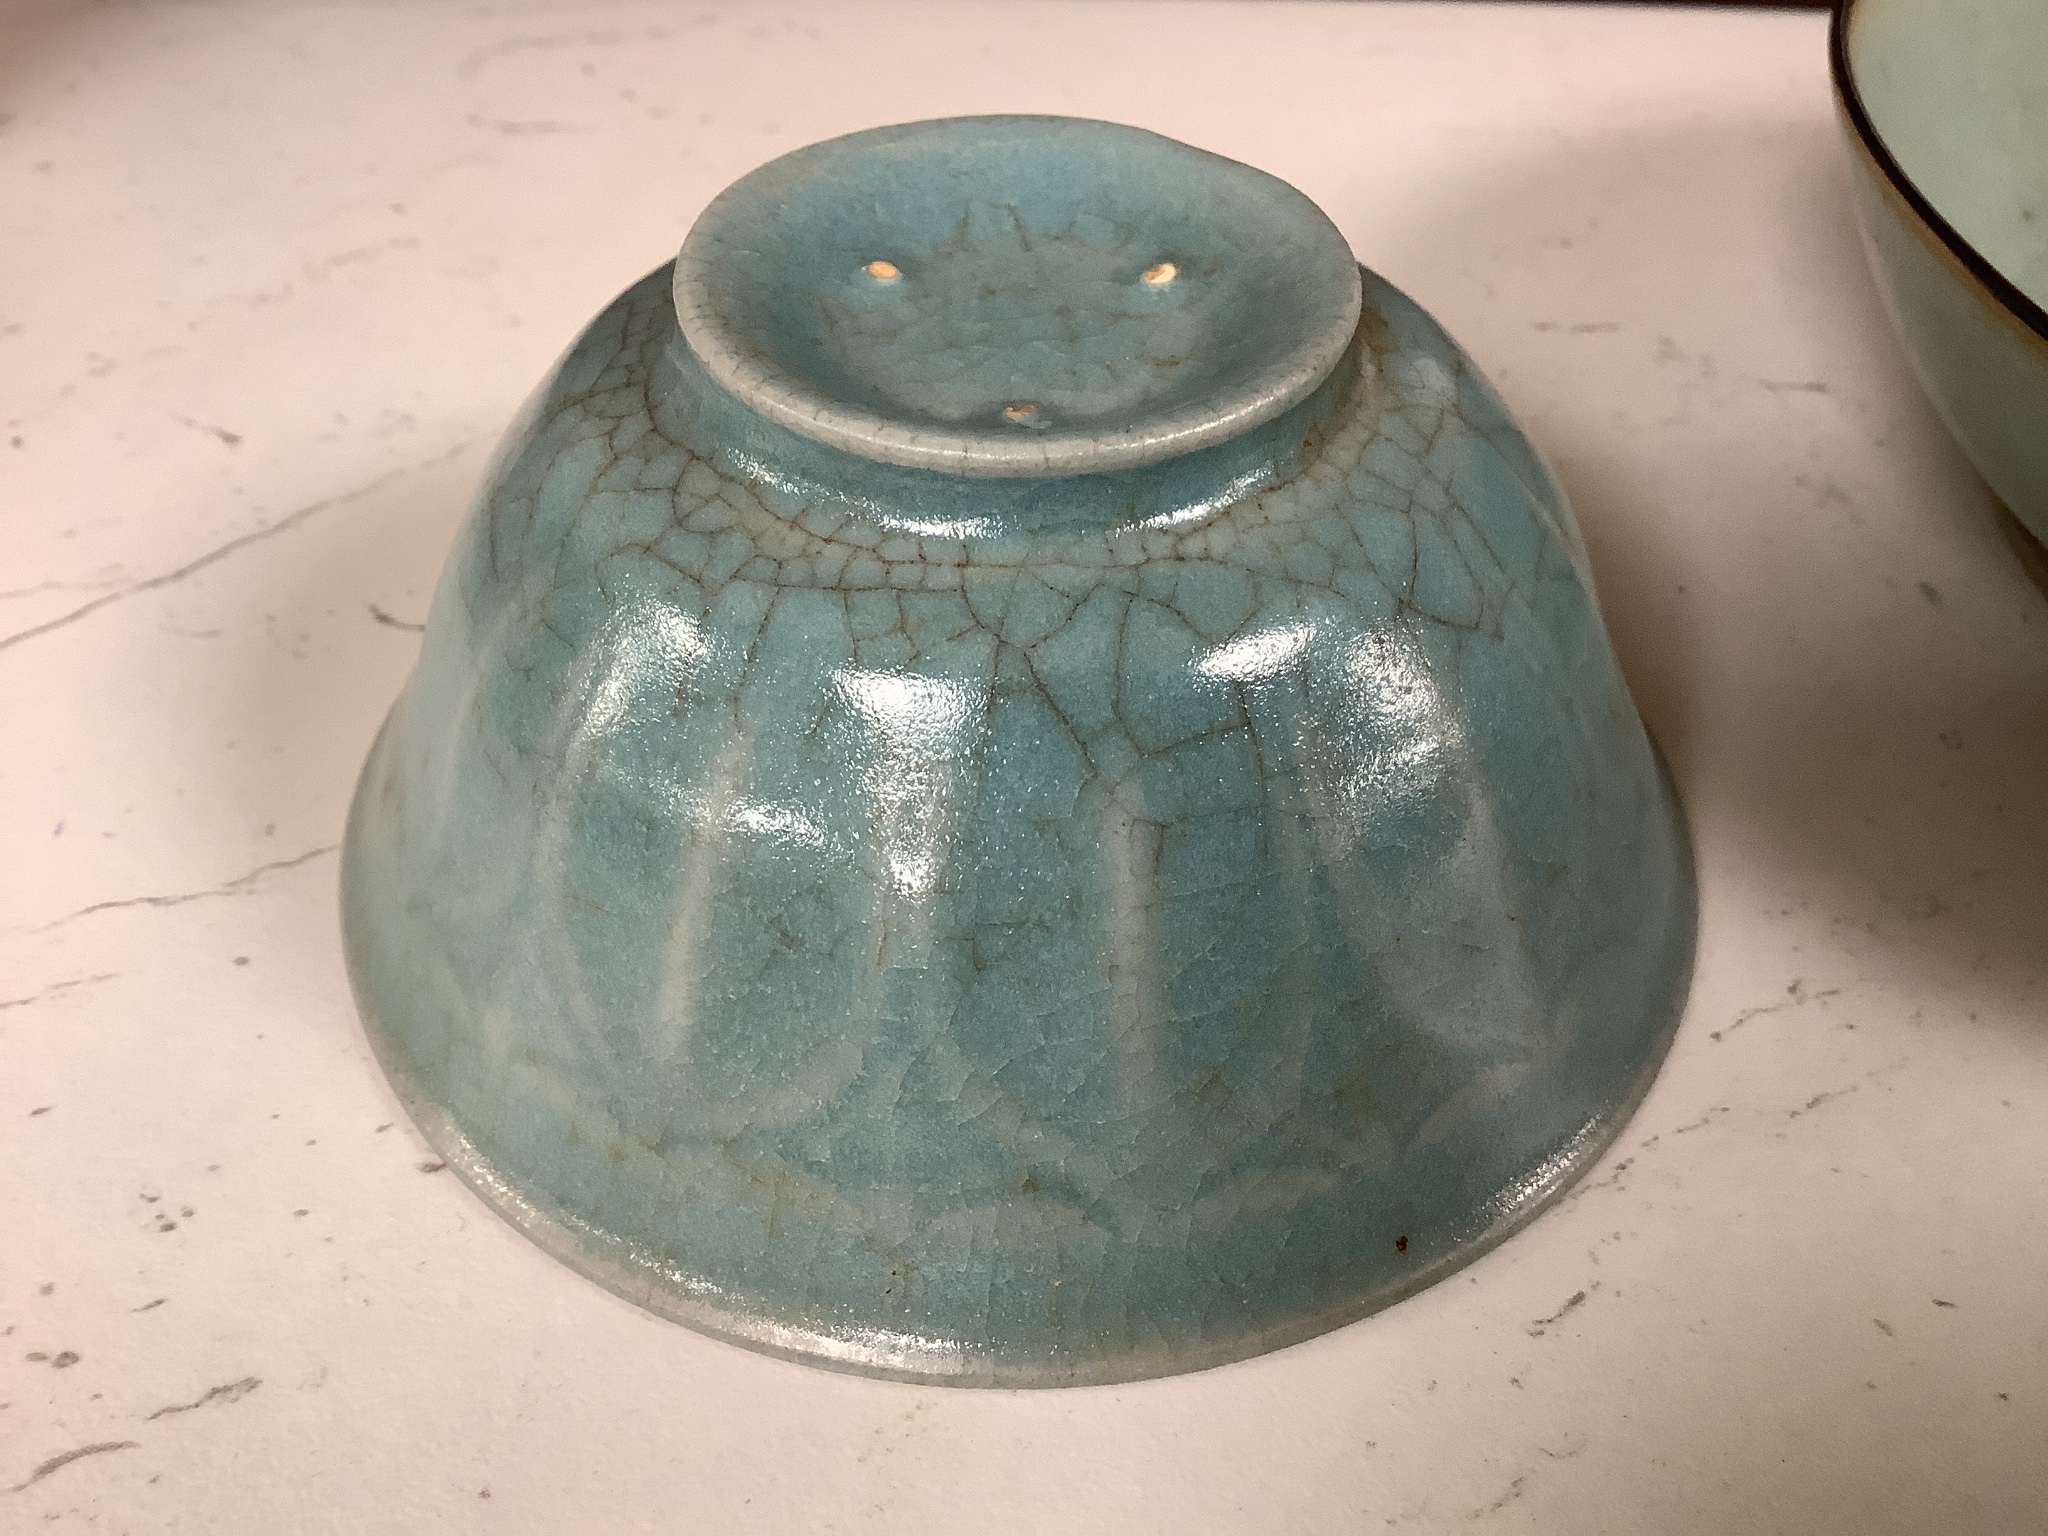 A Chinese celadon bowl and a teabowl, diameter 15cm